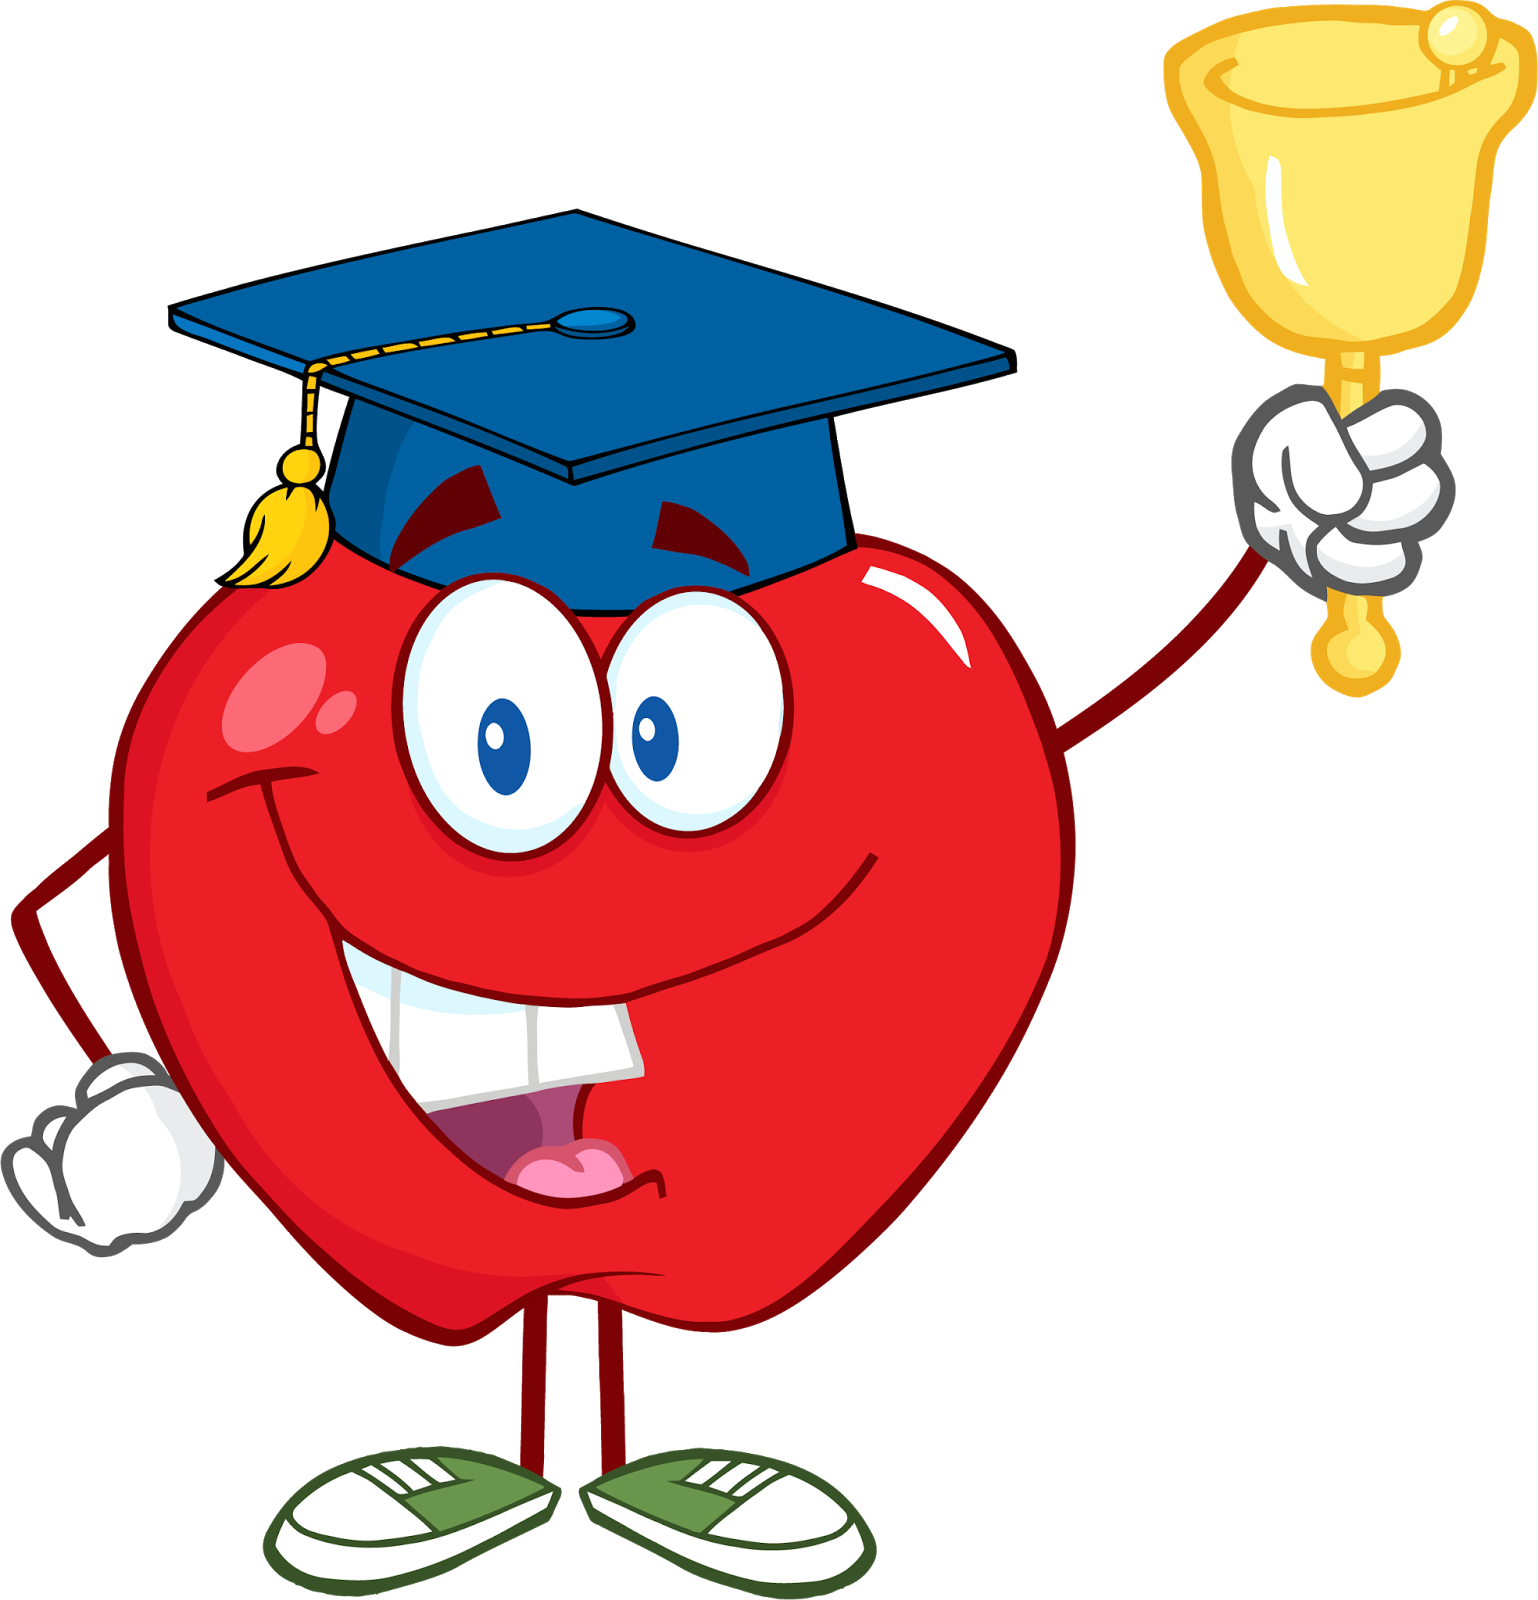 apple back to school clipart - photo #32